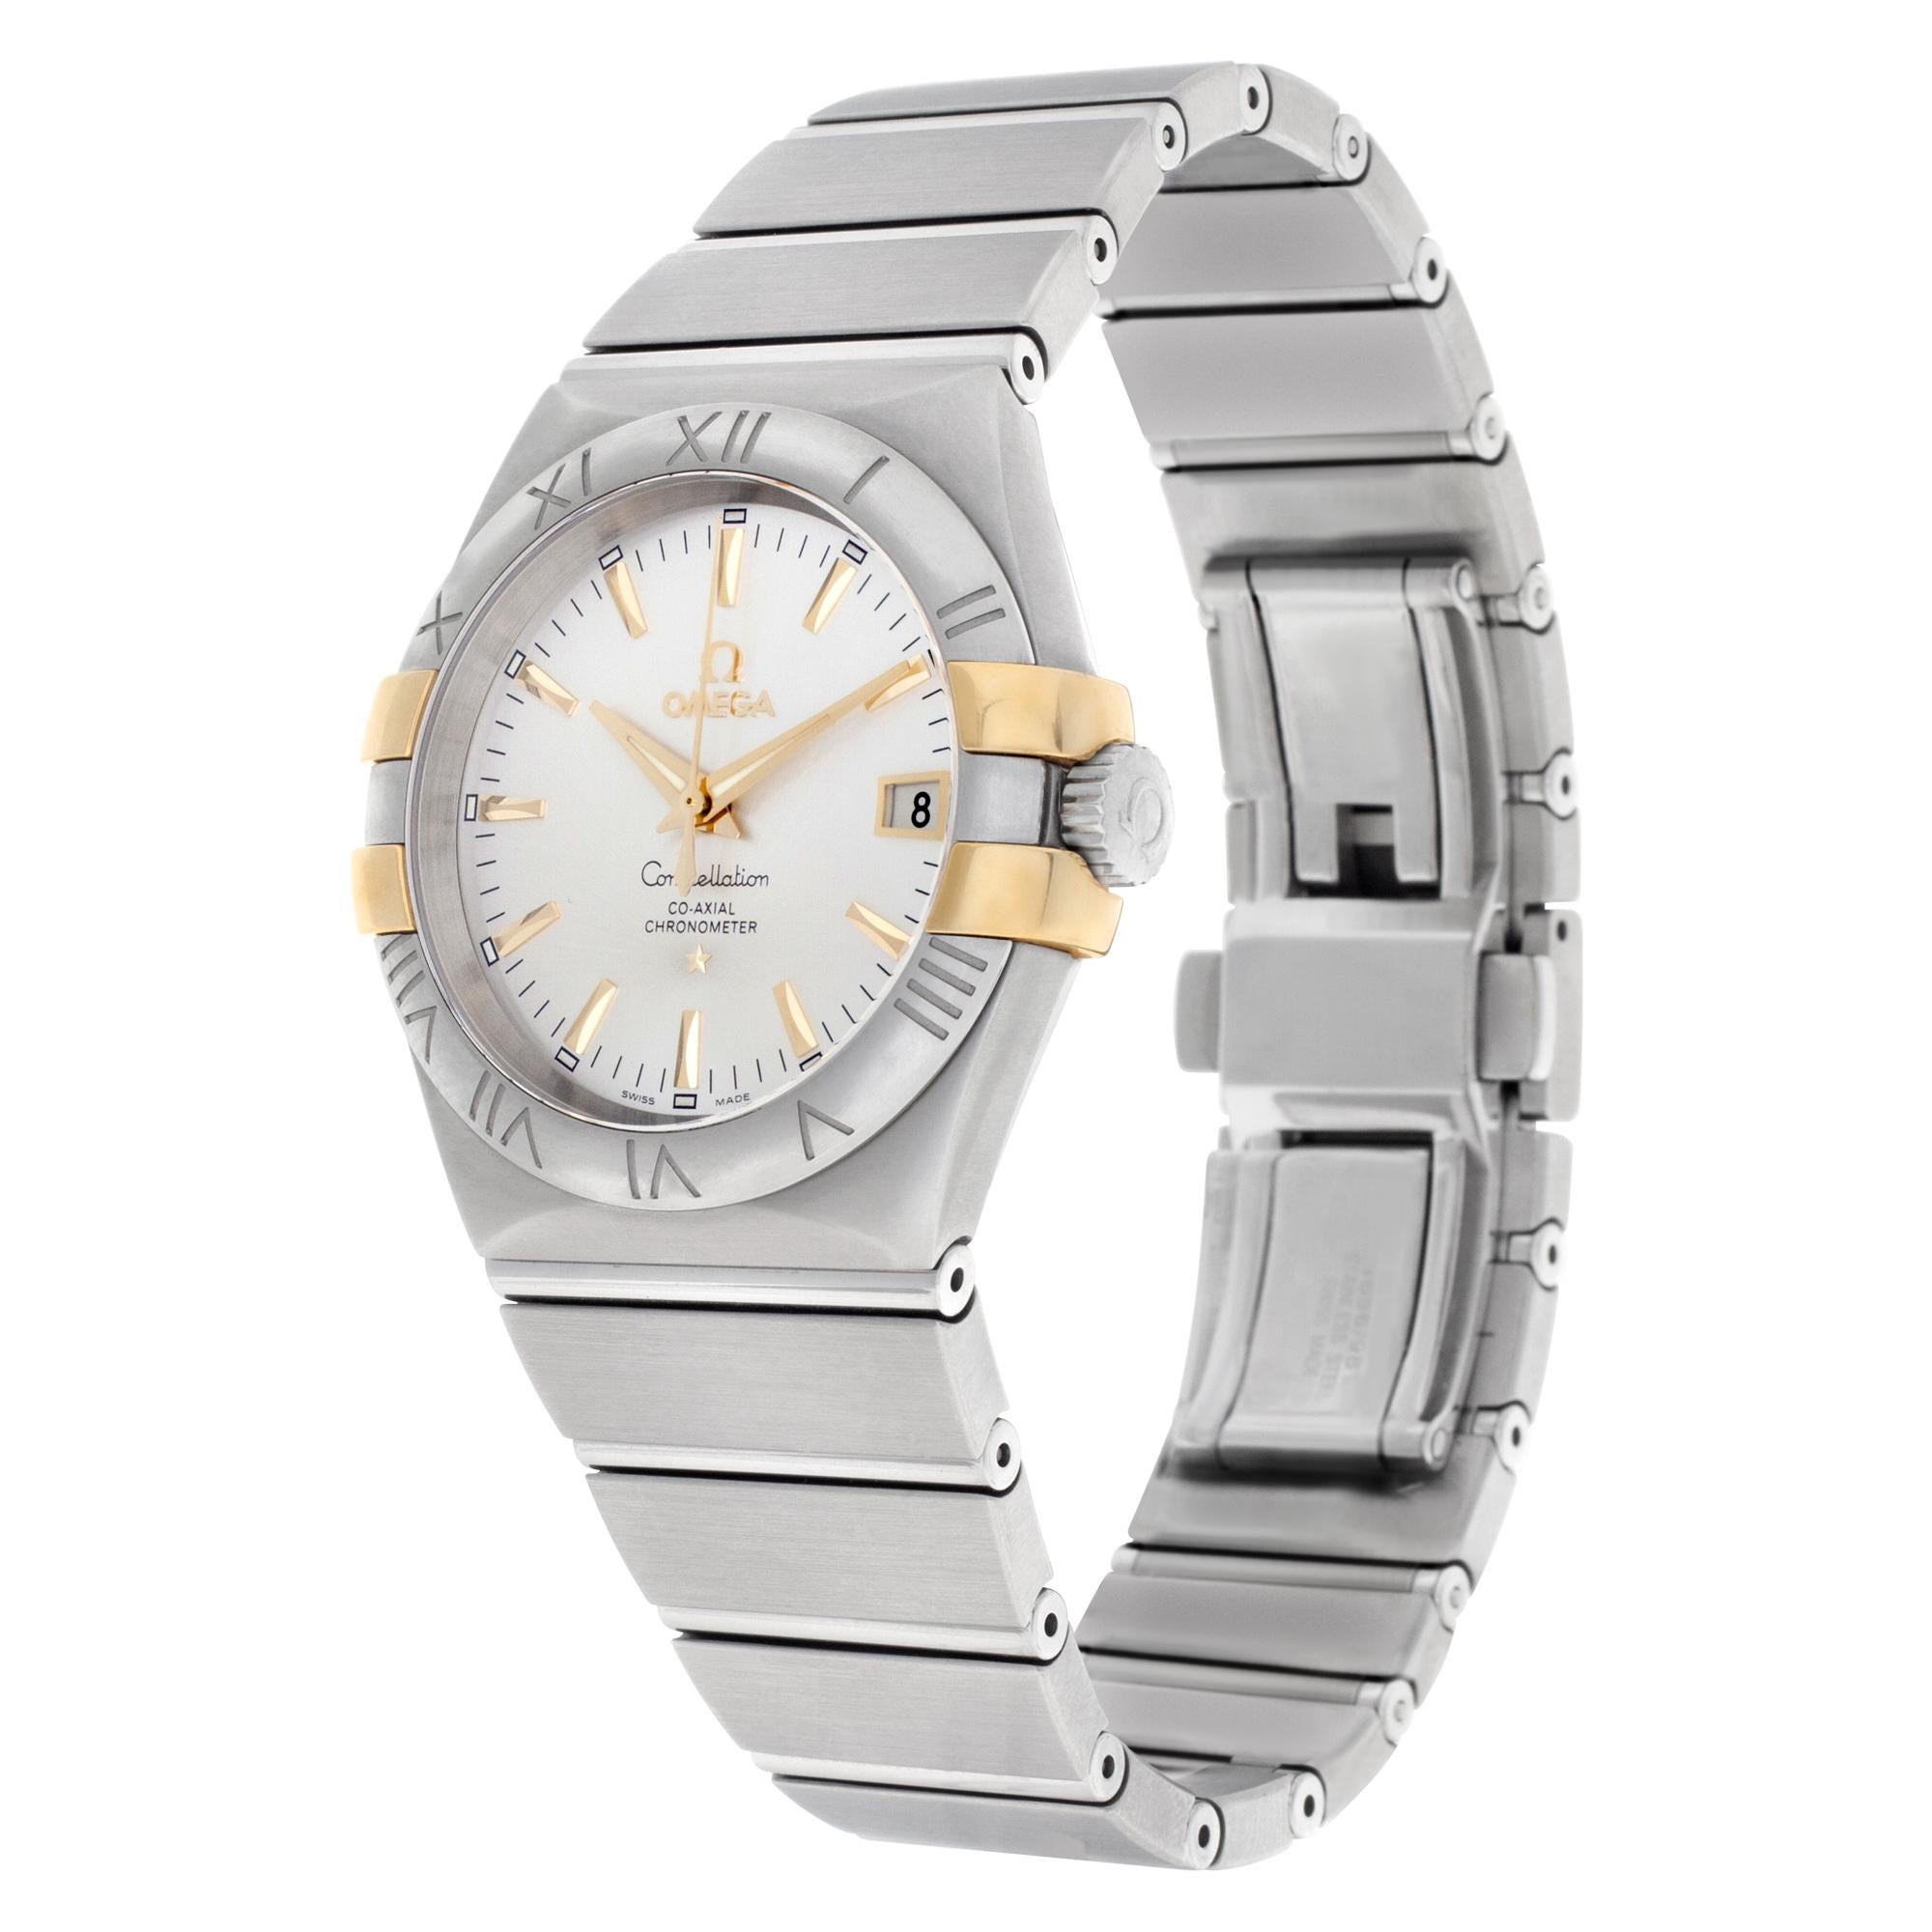 Omega Constellation in 18k & stainless steel. Auto w/ sweep seconds and date. 35 mm case size. With box and papers. Ref 123.20.35.20.02.004. Circa 2017. Fine Pre-owned Omega Watch.

Certified preowned Classic Omega Constellation 123.20.35.20.02.004